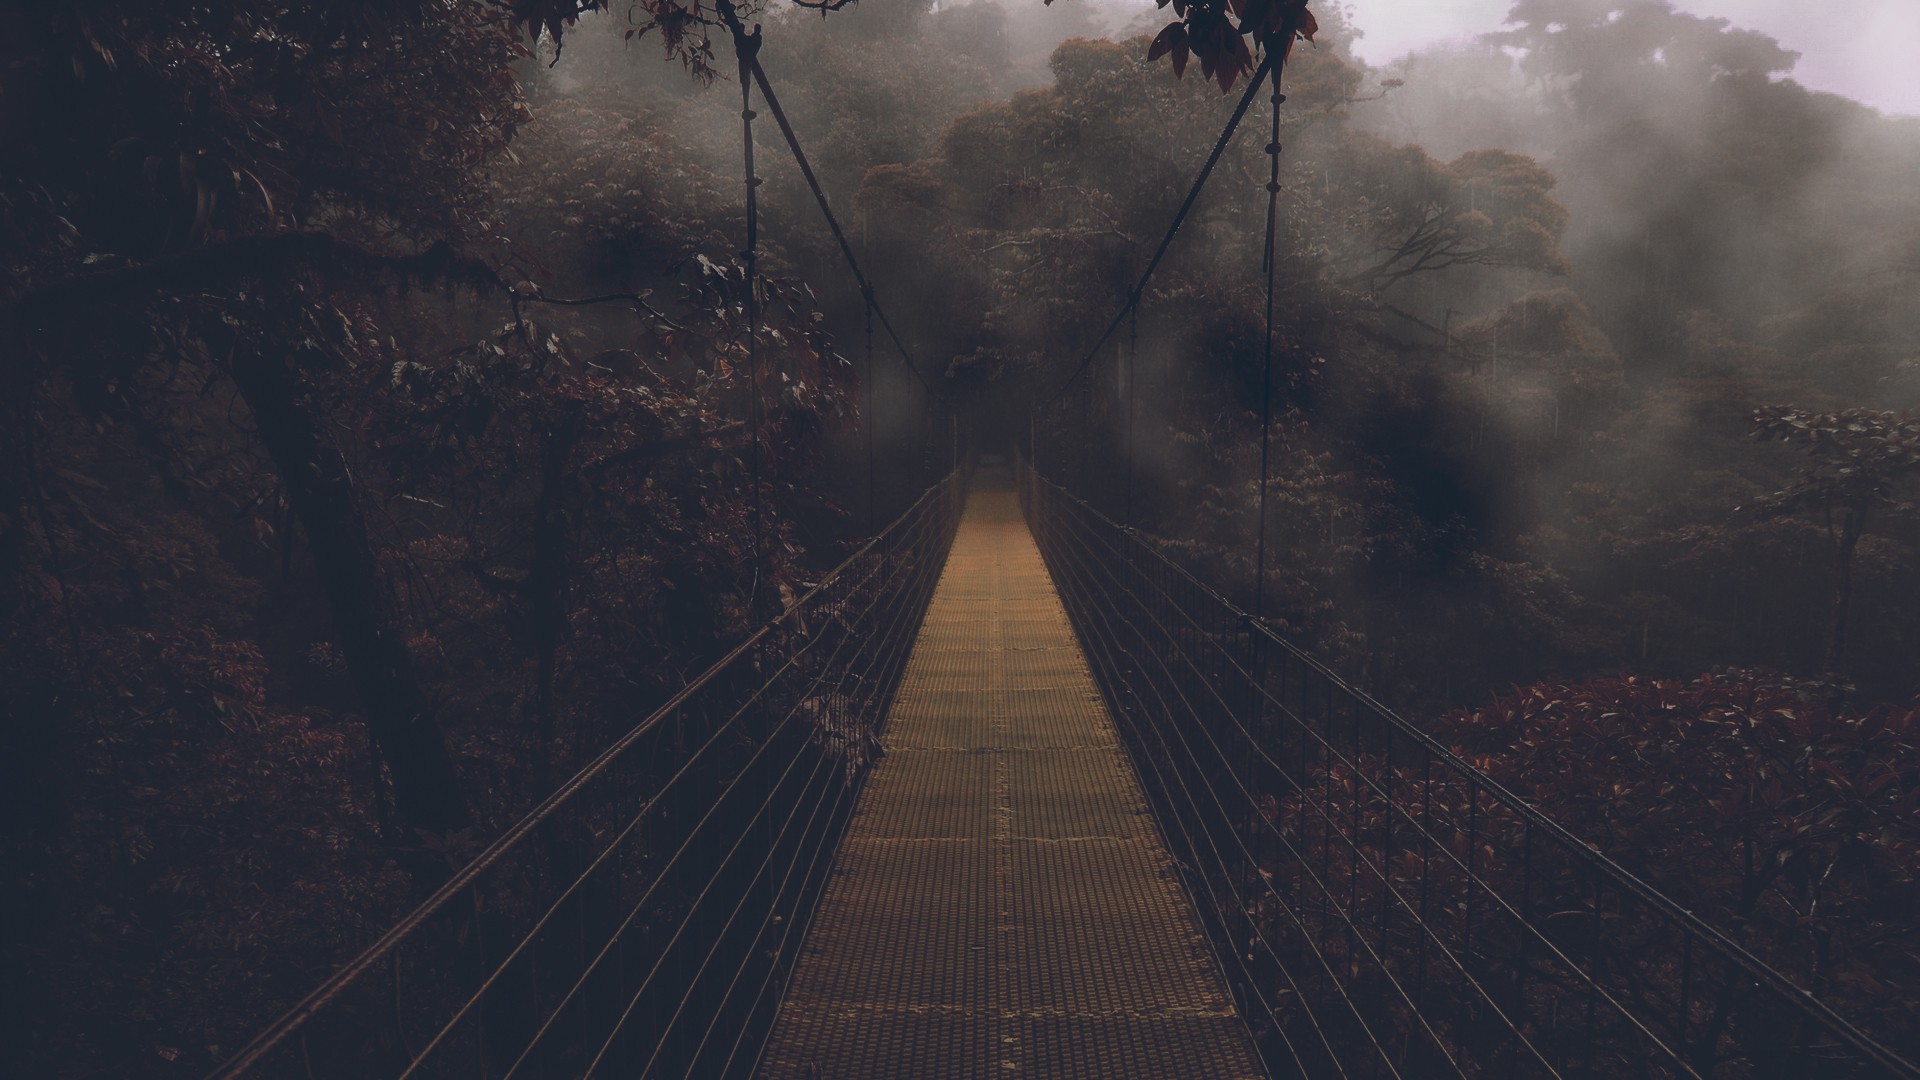 Bridge in a gloomy forest wallpapers and images - wallpapers, pictures ...